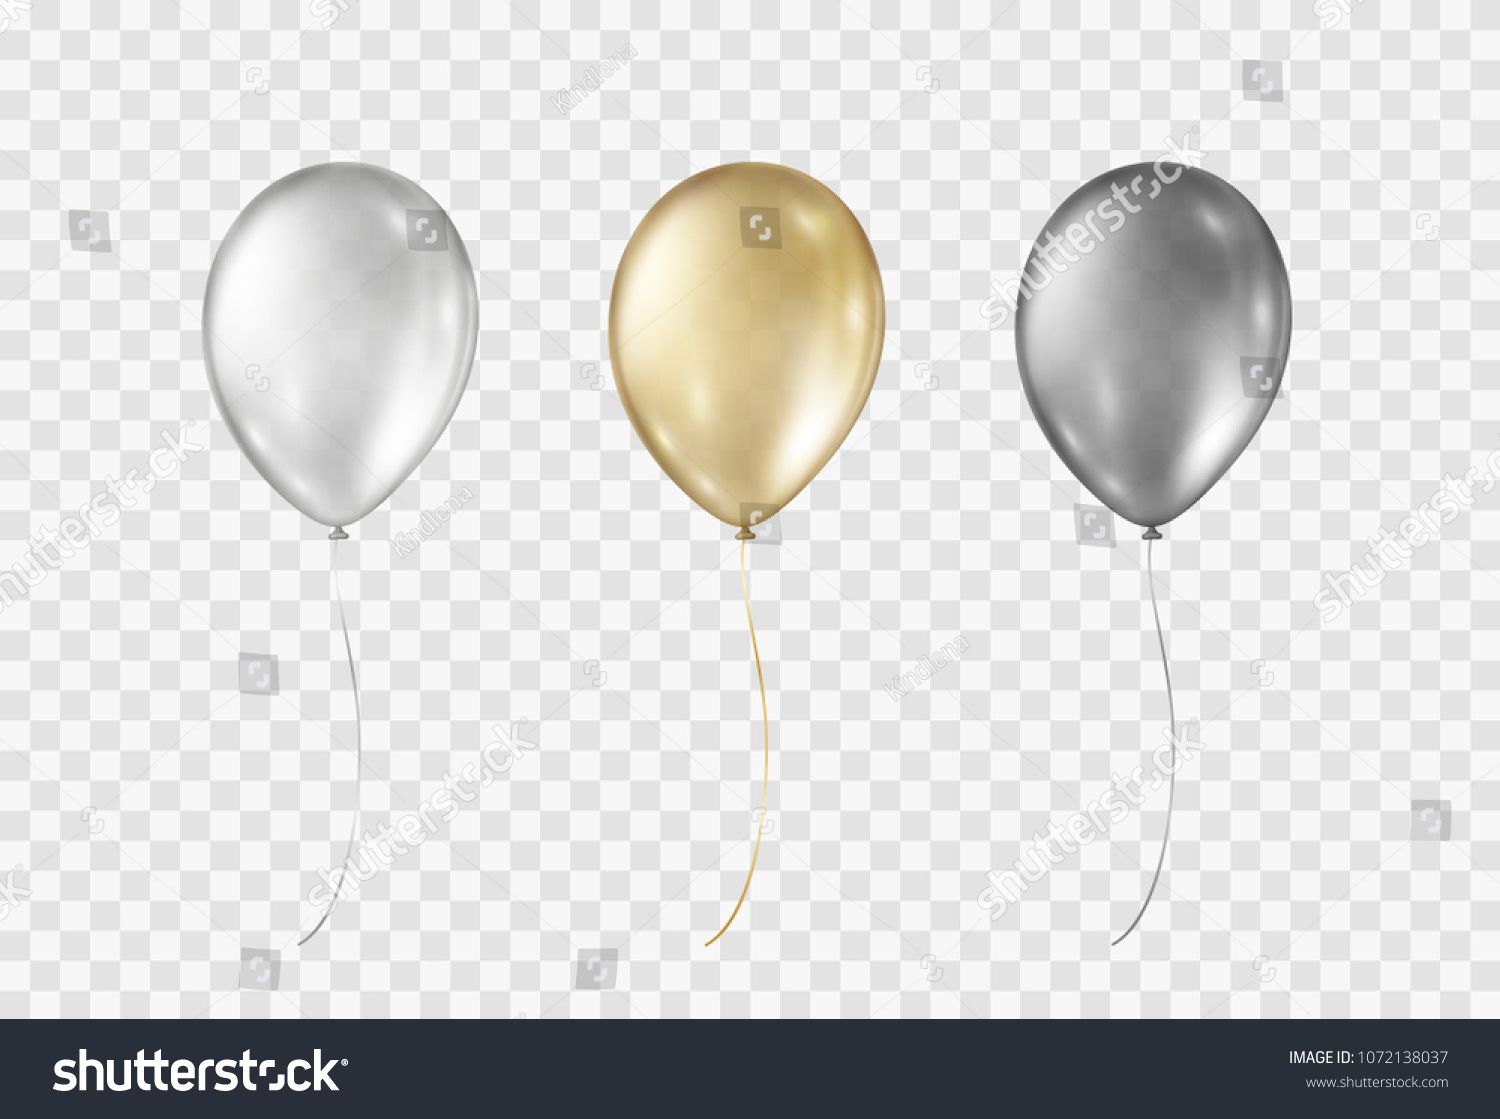 Balloons Isolated On Transparent Background Glossy Gold Silver